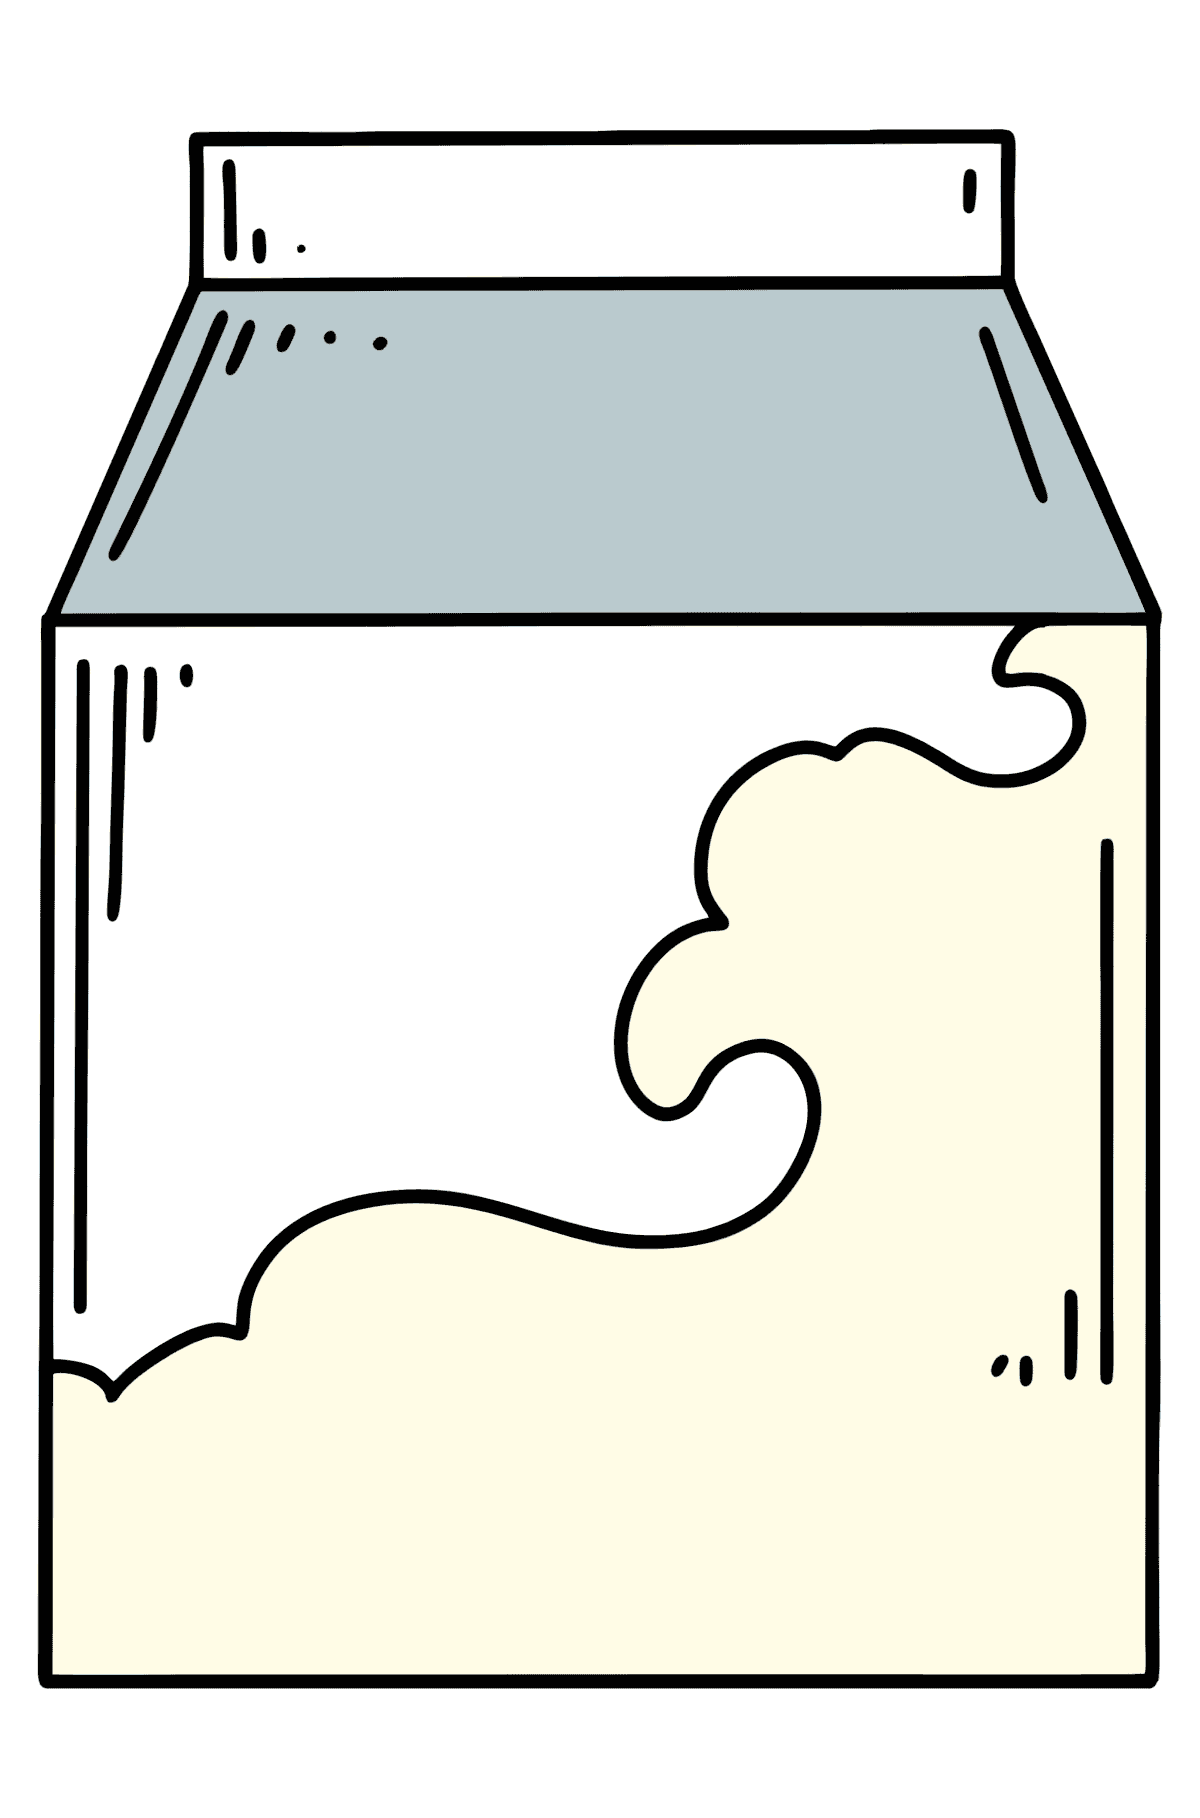 Coloring page - carton of milk - Coloring Pages for Kids